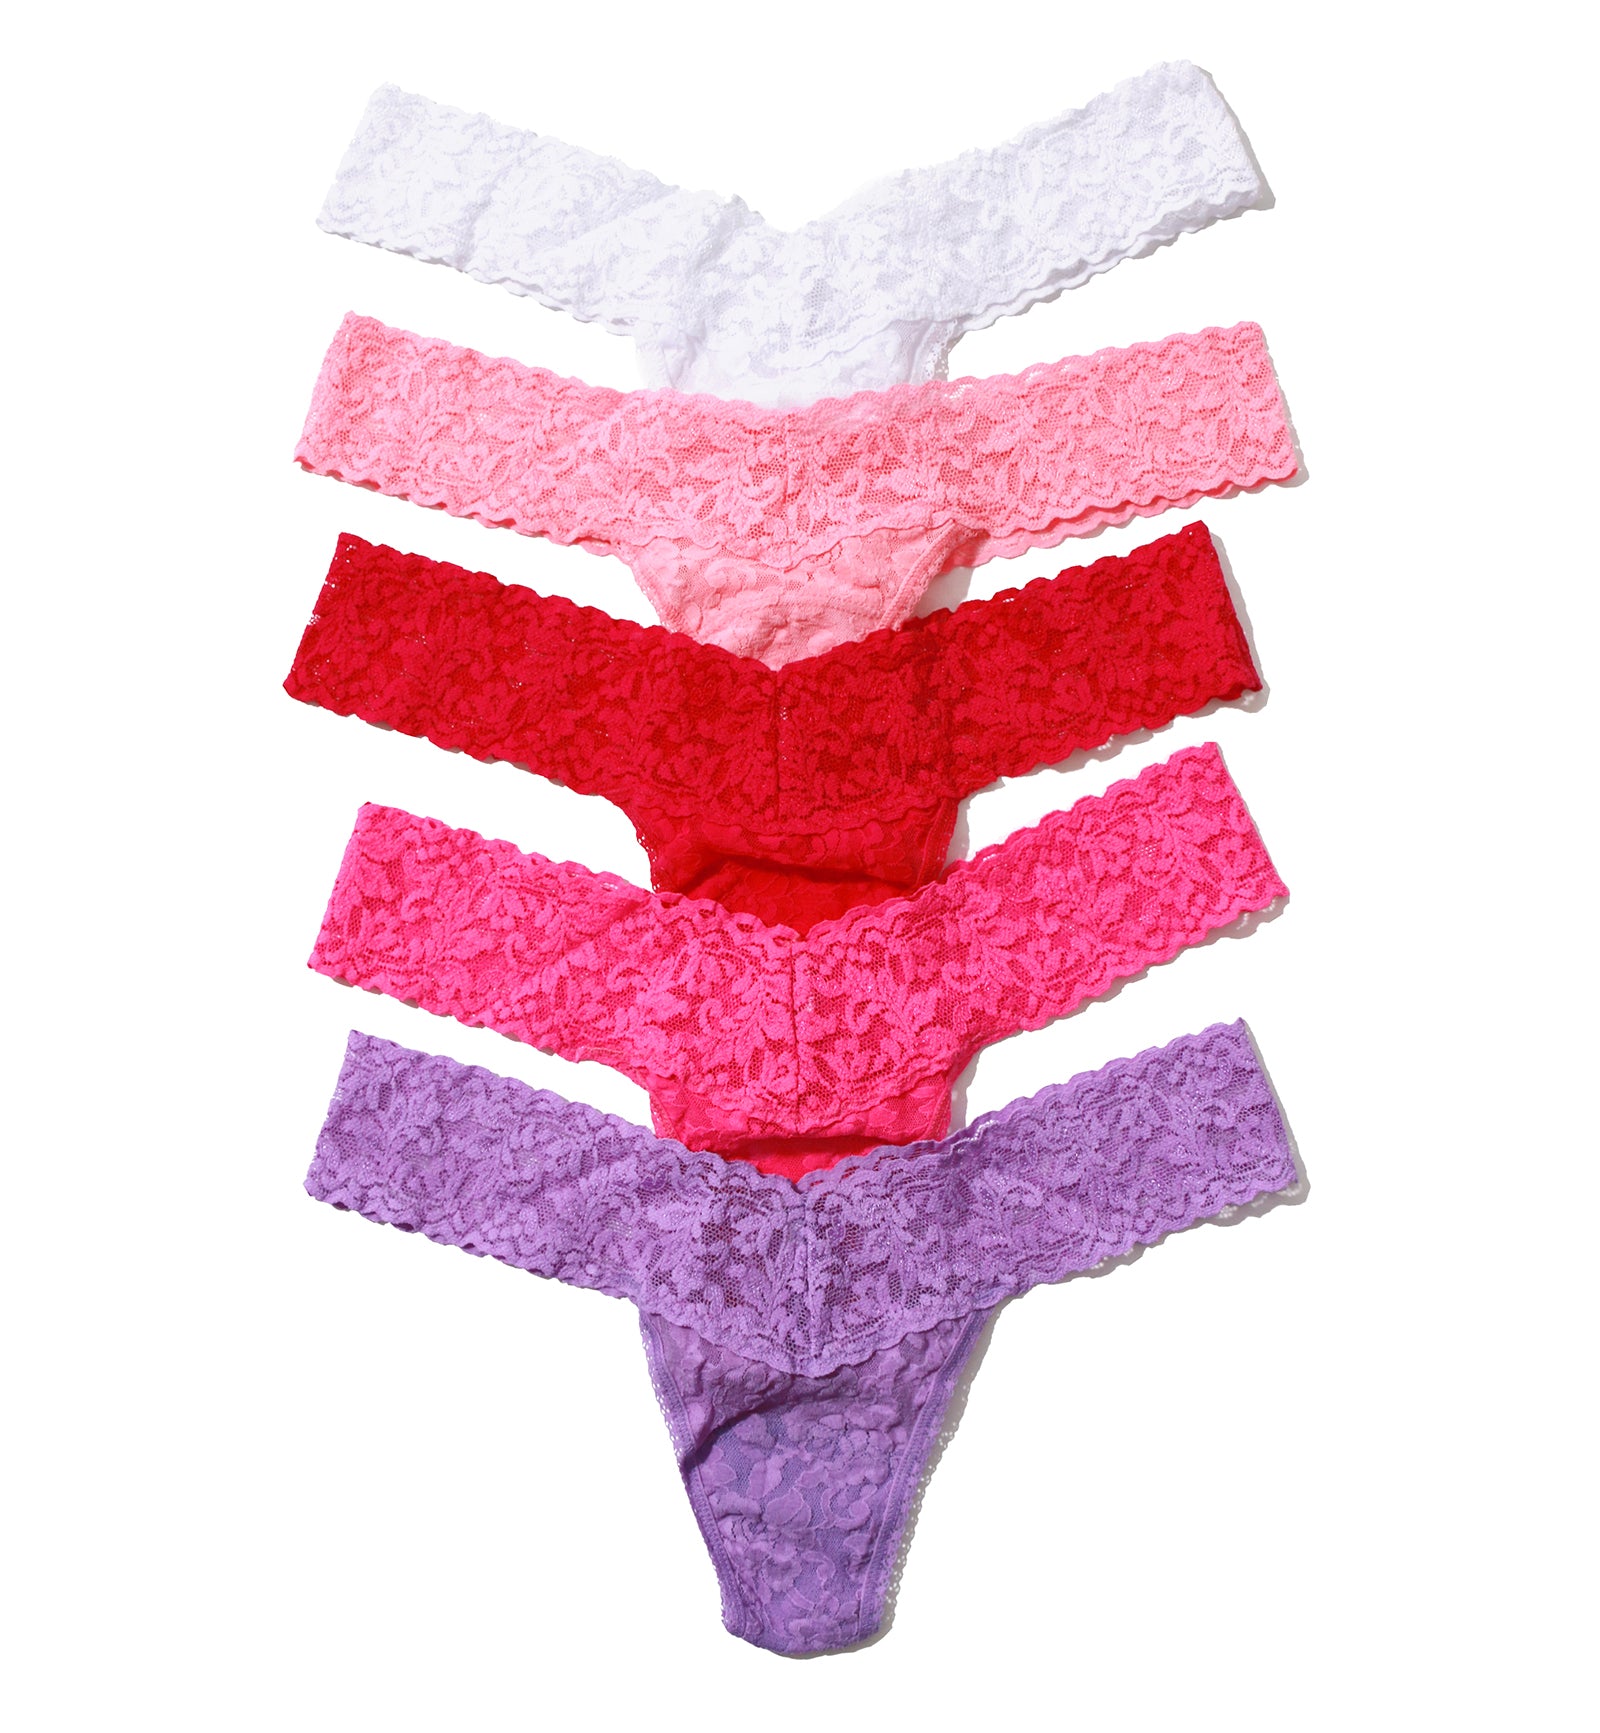 Hanky Panky 5-PACK Signature Lace Low Rise Thong (49115PK),Holiday23 FPRV - FPRV,One Size